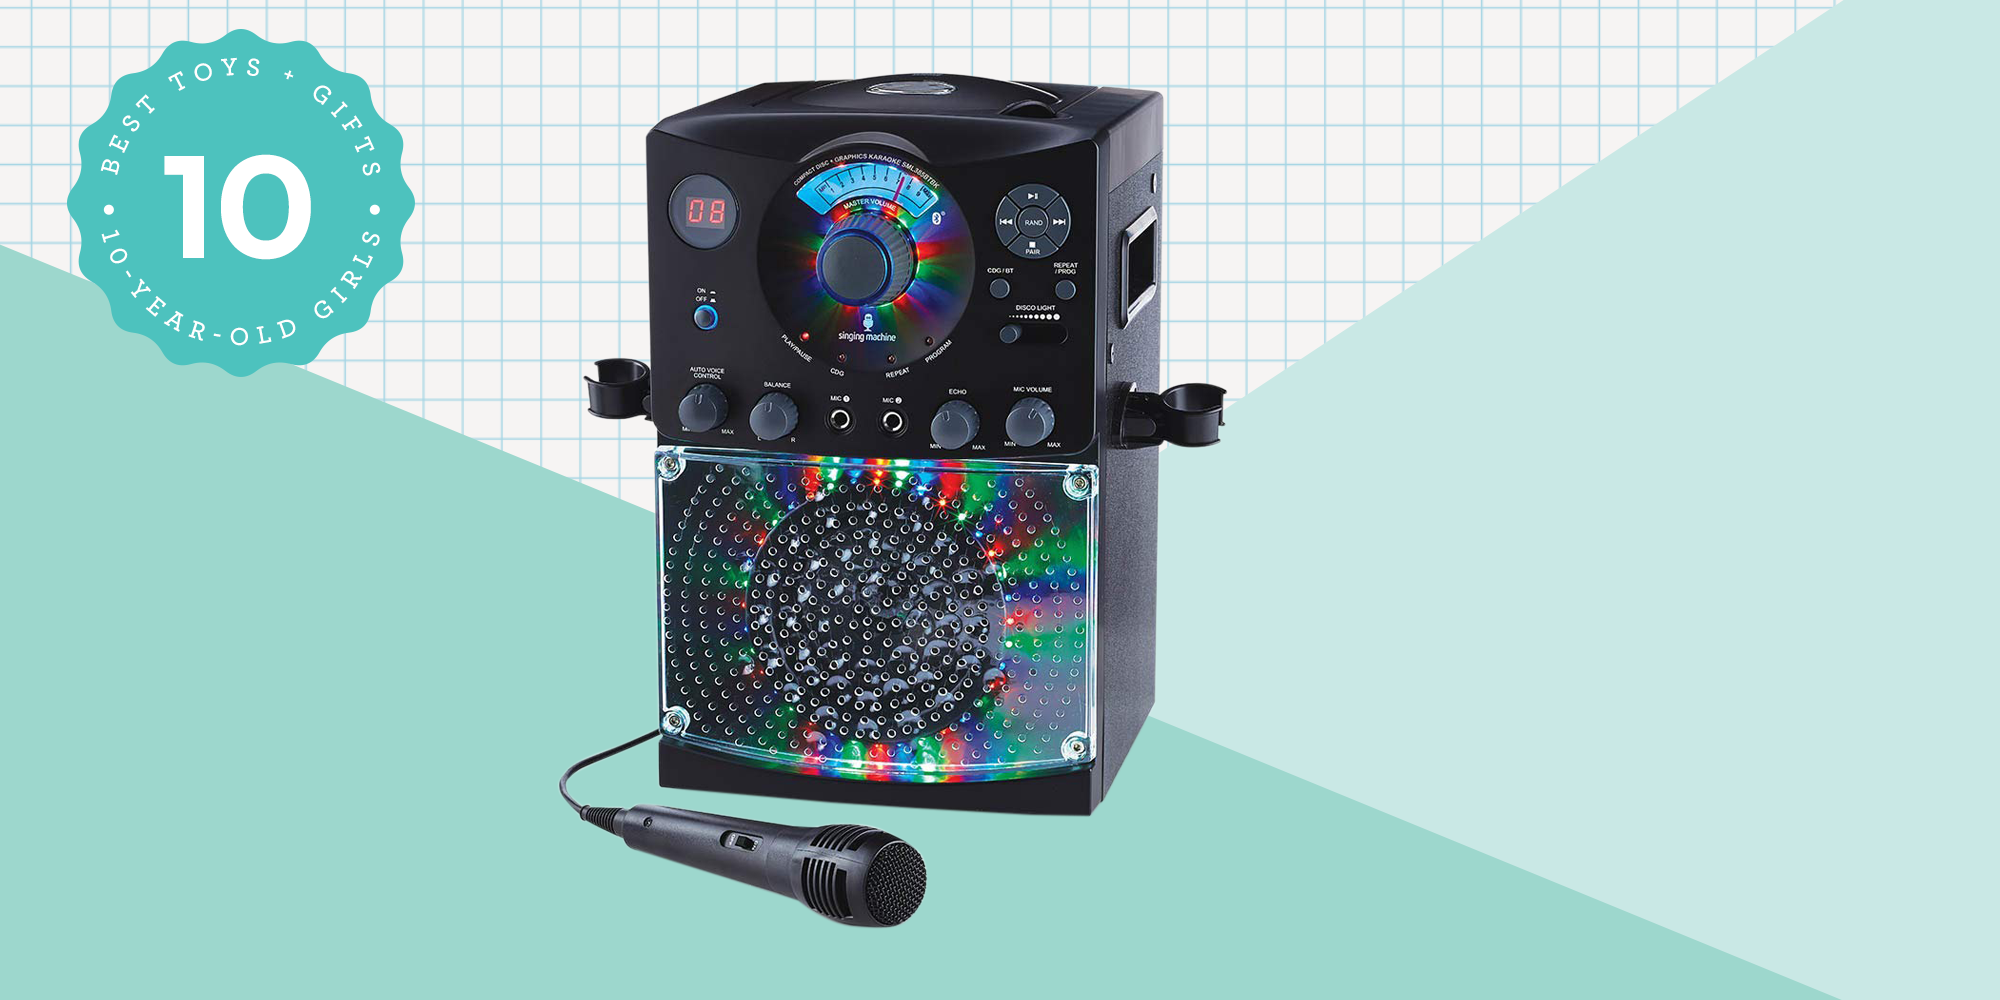 This LightUp Karaoke System Is One of the Best Gifts for 10YearOlds